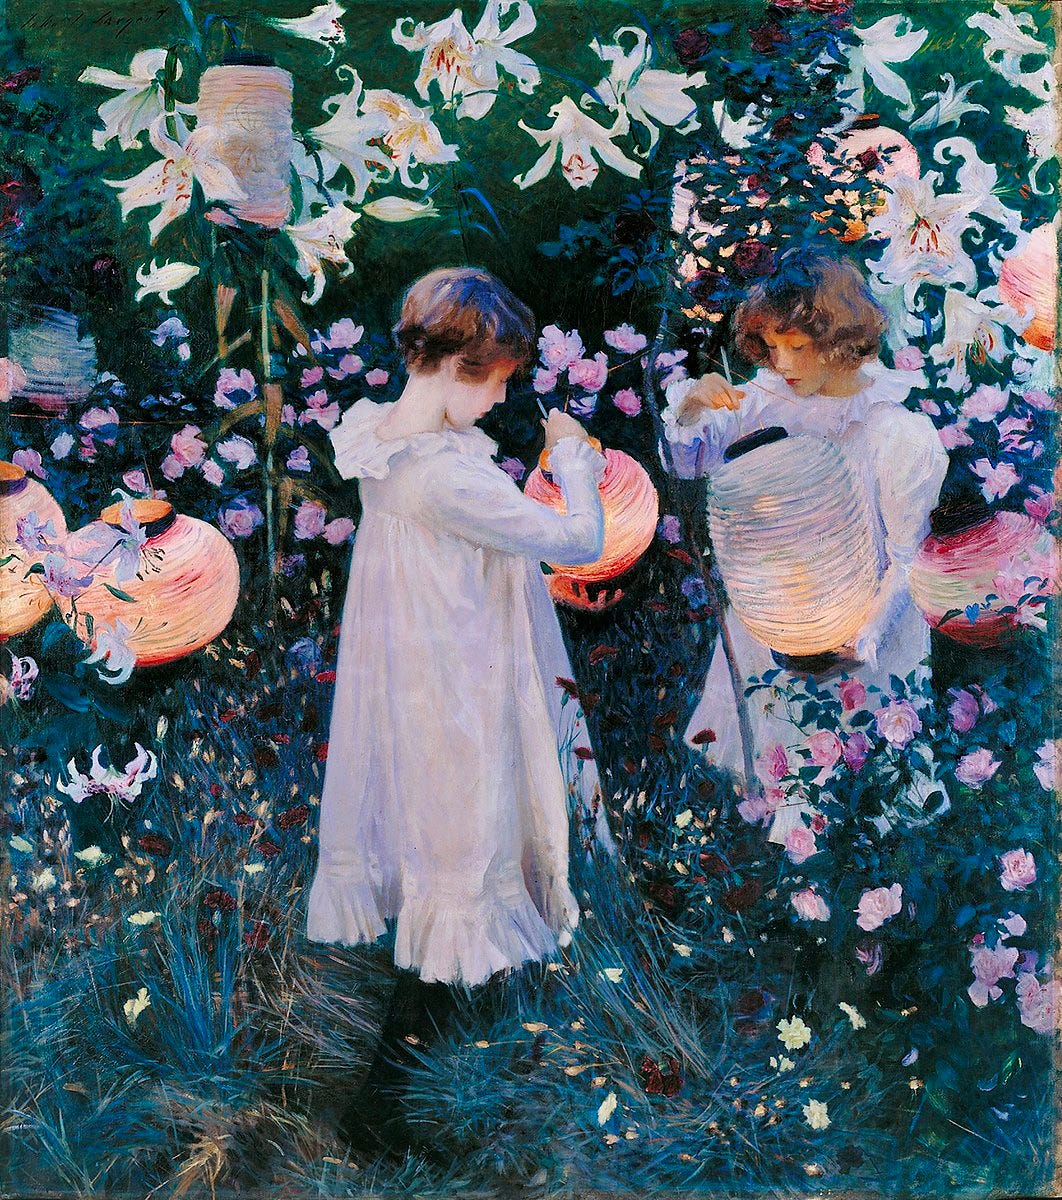 Sargent's 'Carnation, Lily, Lily, Rose'" ~ The Imaginative Conservative